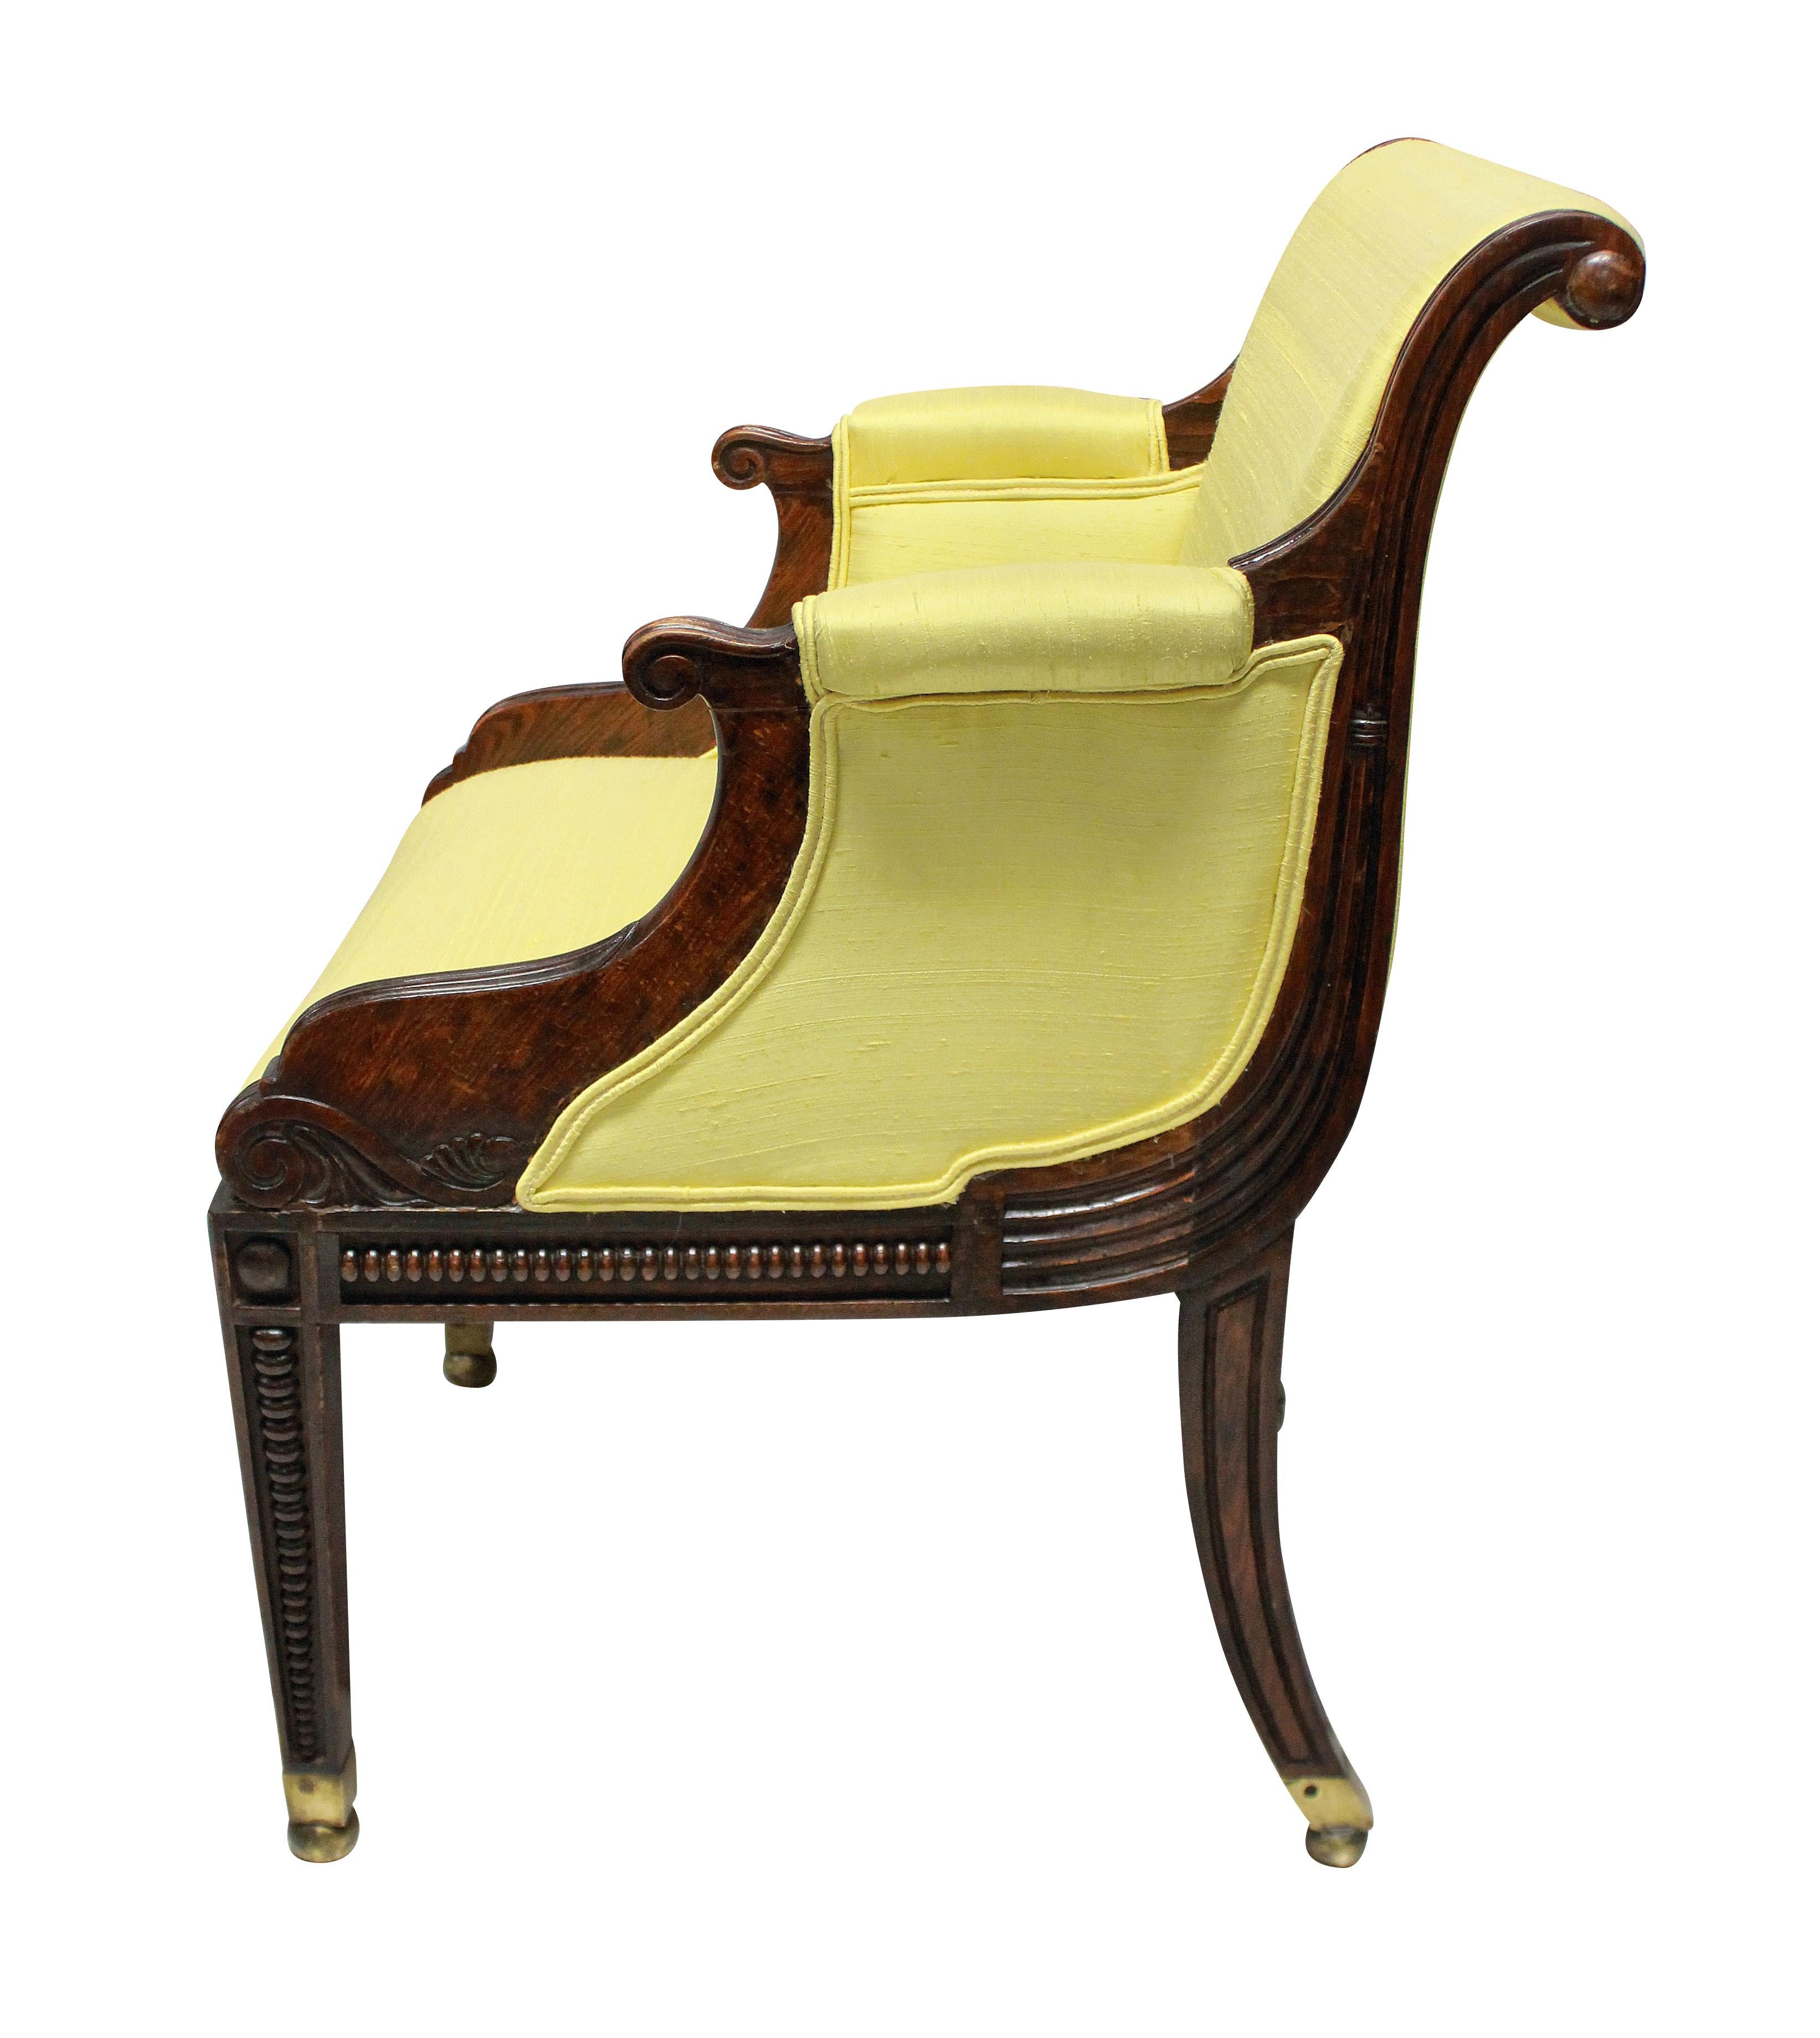 British Fine English Regency Faux Rosewood Library Chair